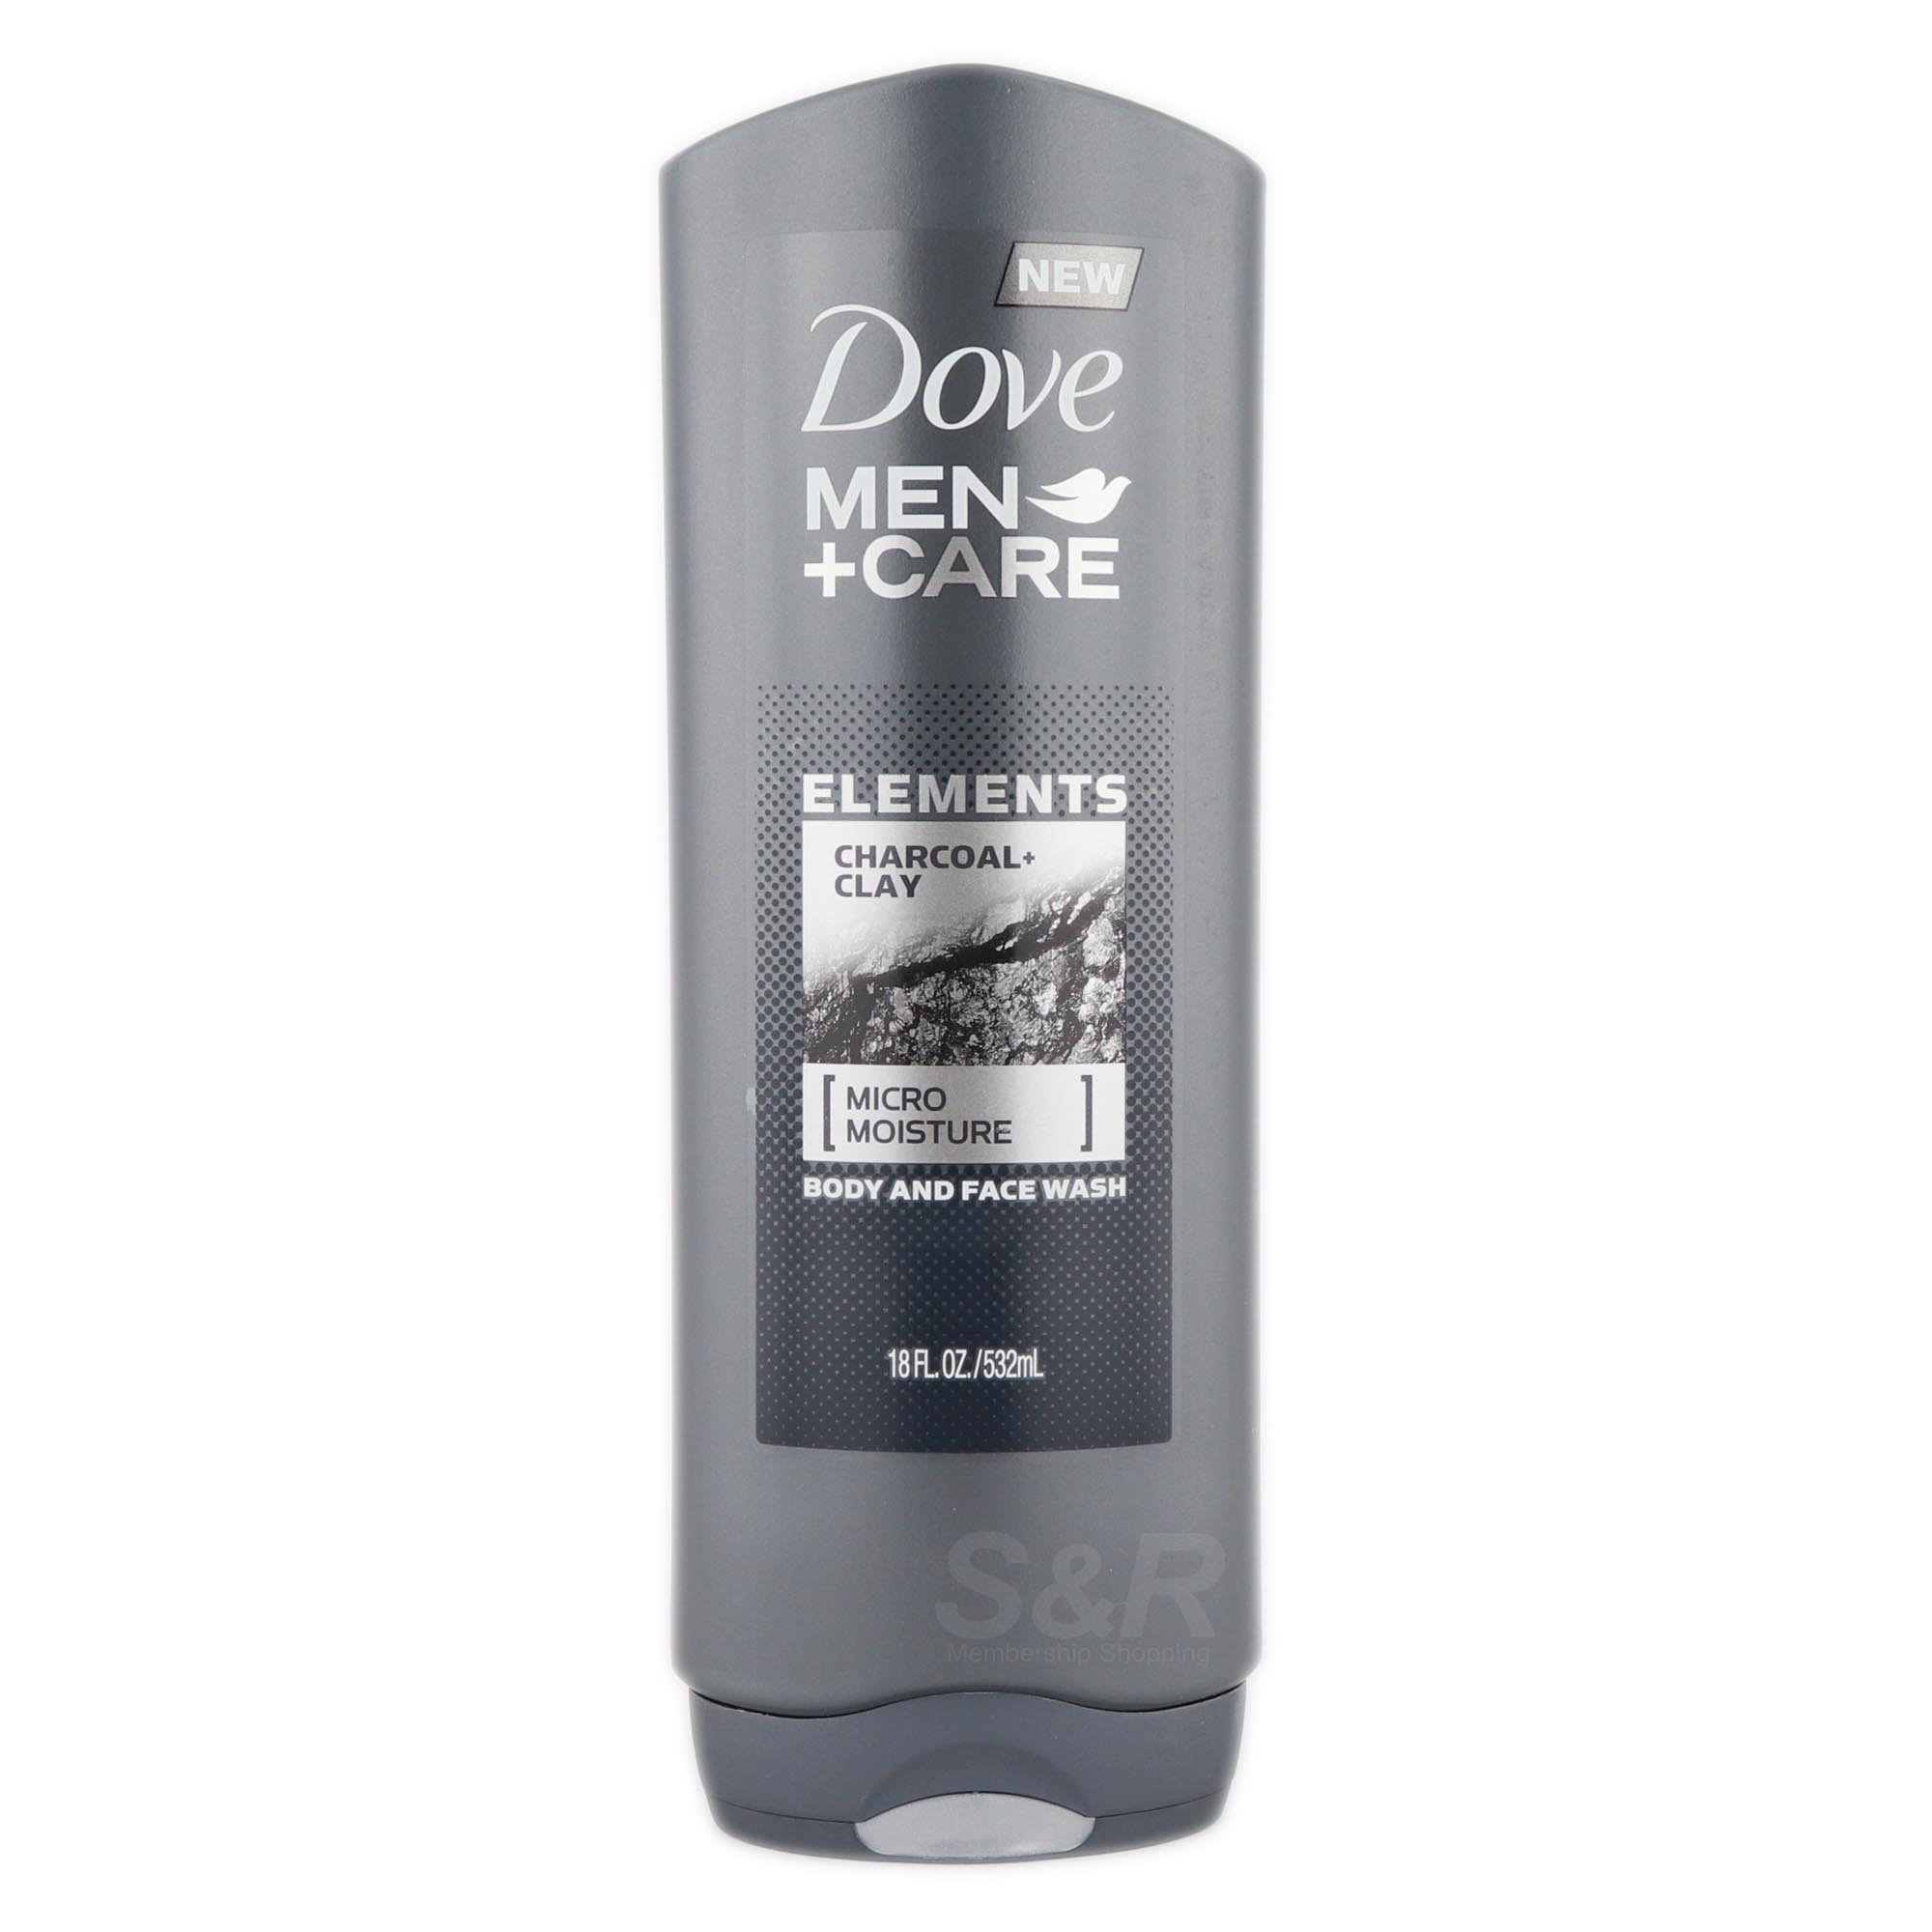 Dove Men+Care Elements Charcoal + Clay Face and Body Wash 532mL